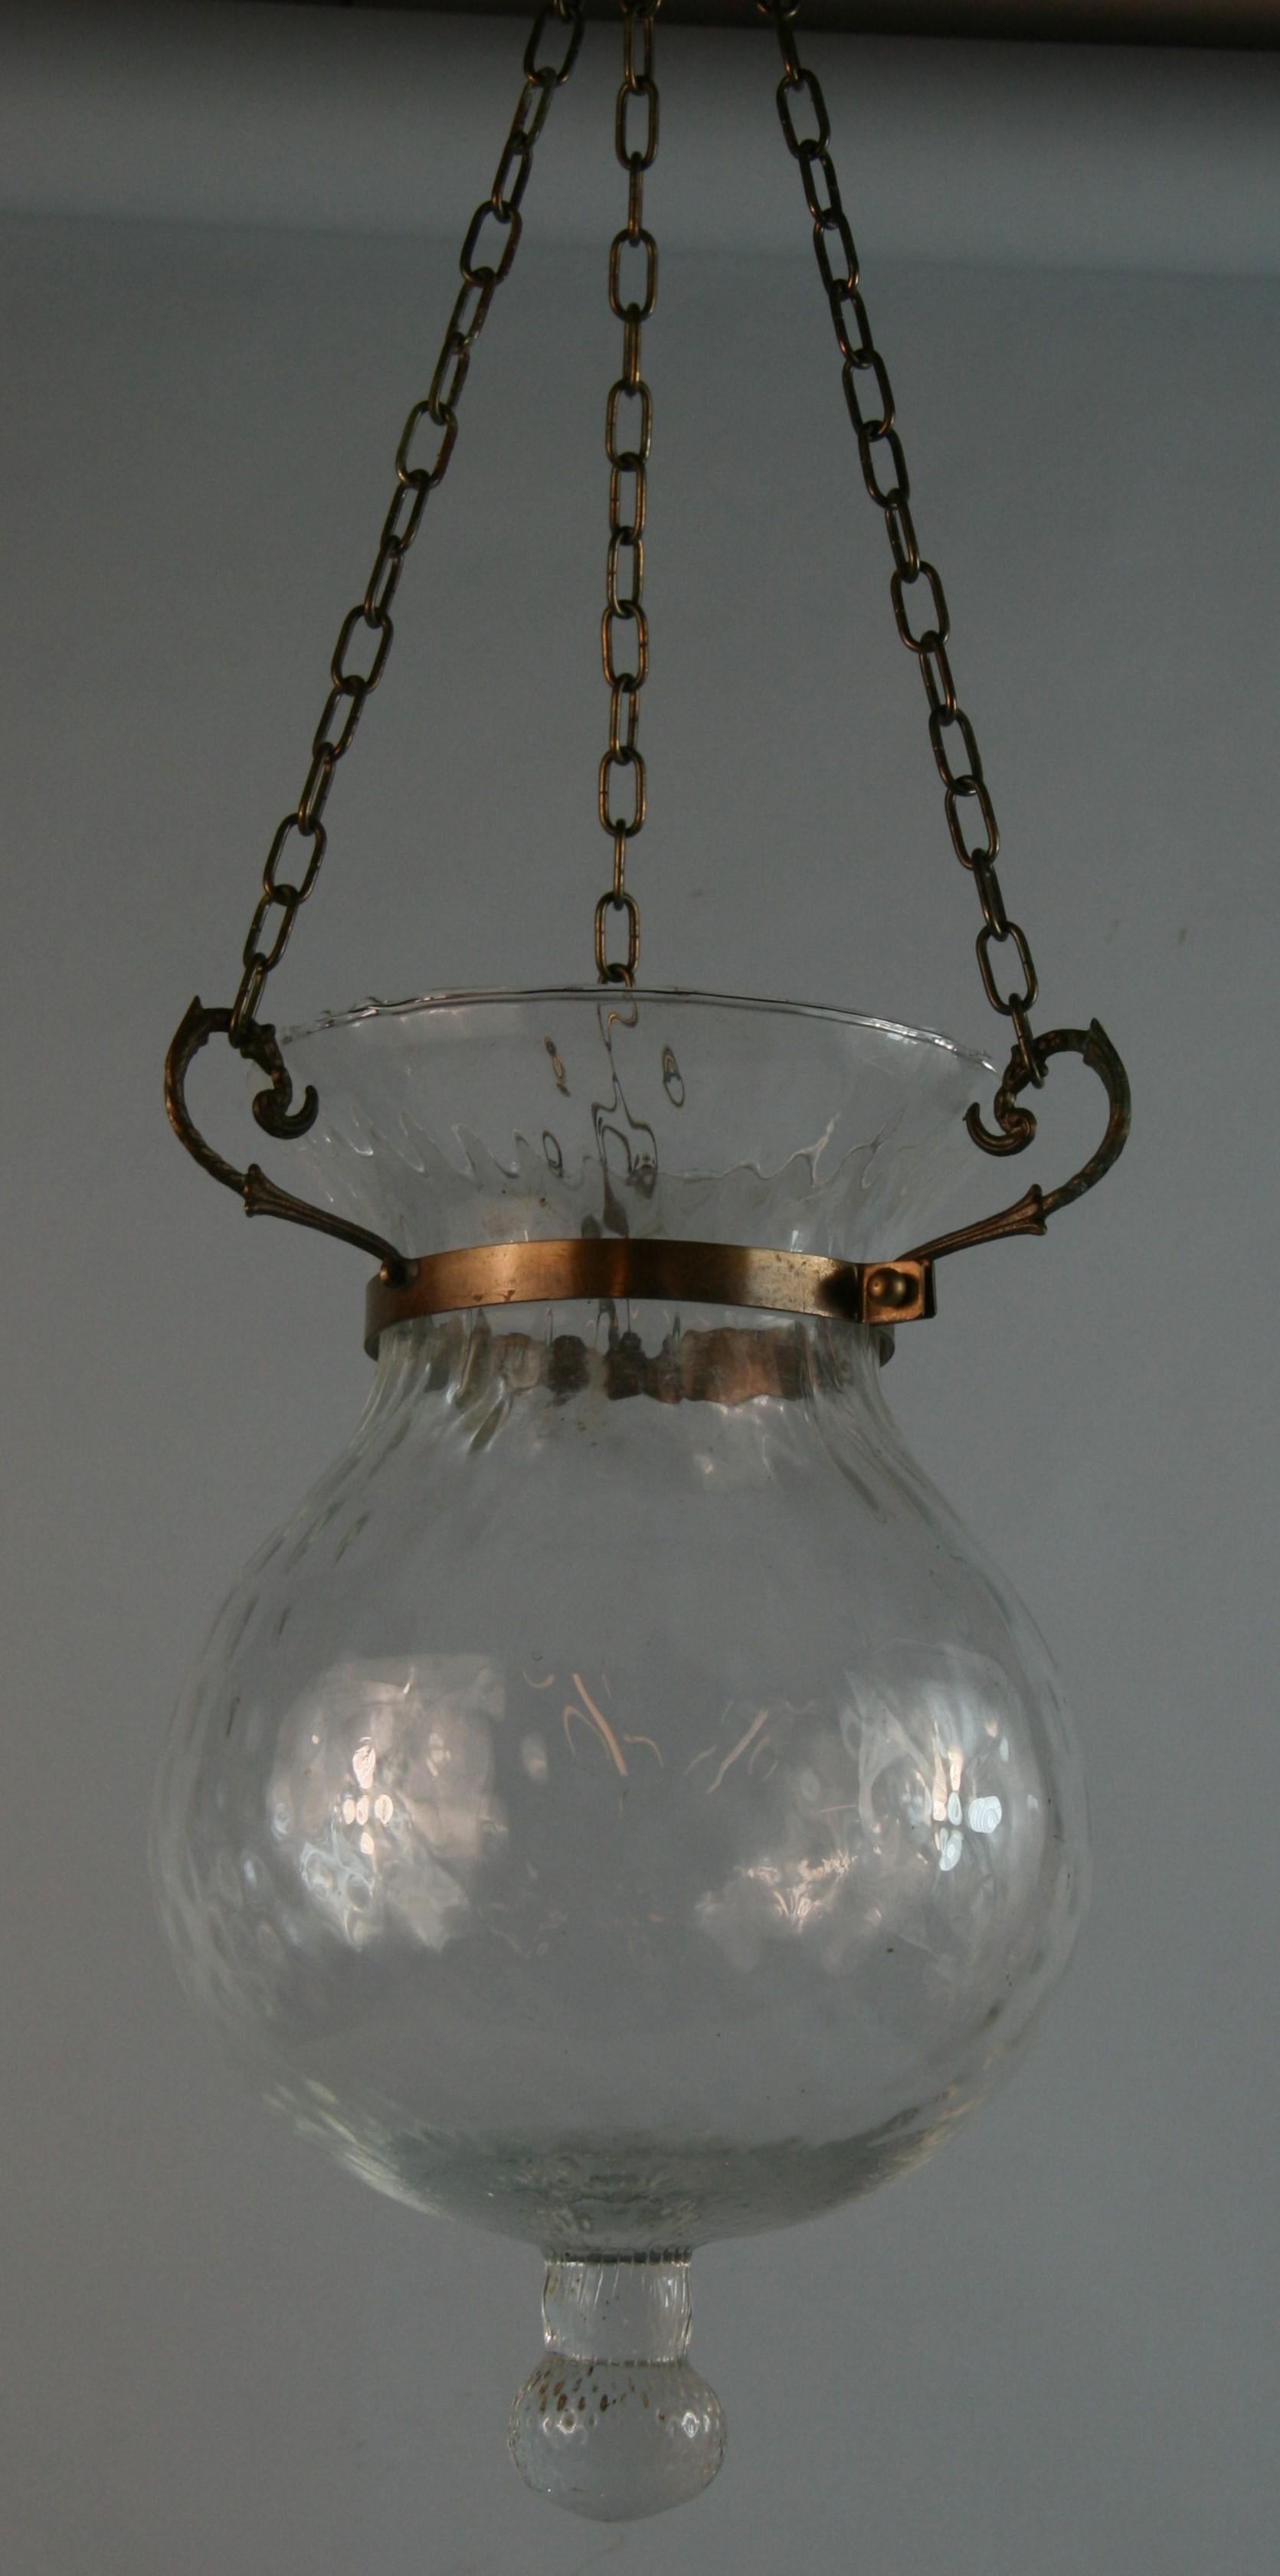 1507 Italian hand blown glass bell jar with brass hangers
Will be wired with one bulb and desired amount of chain